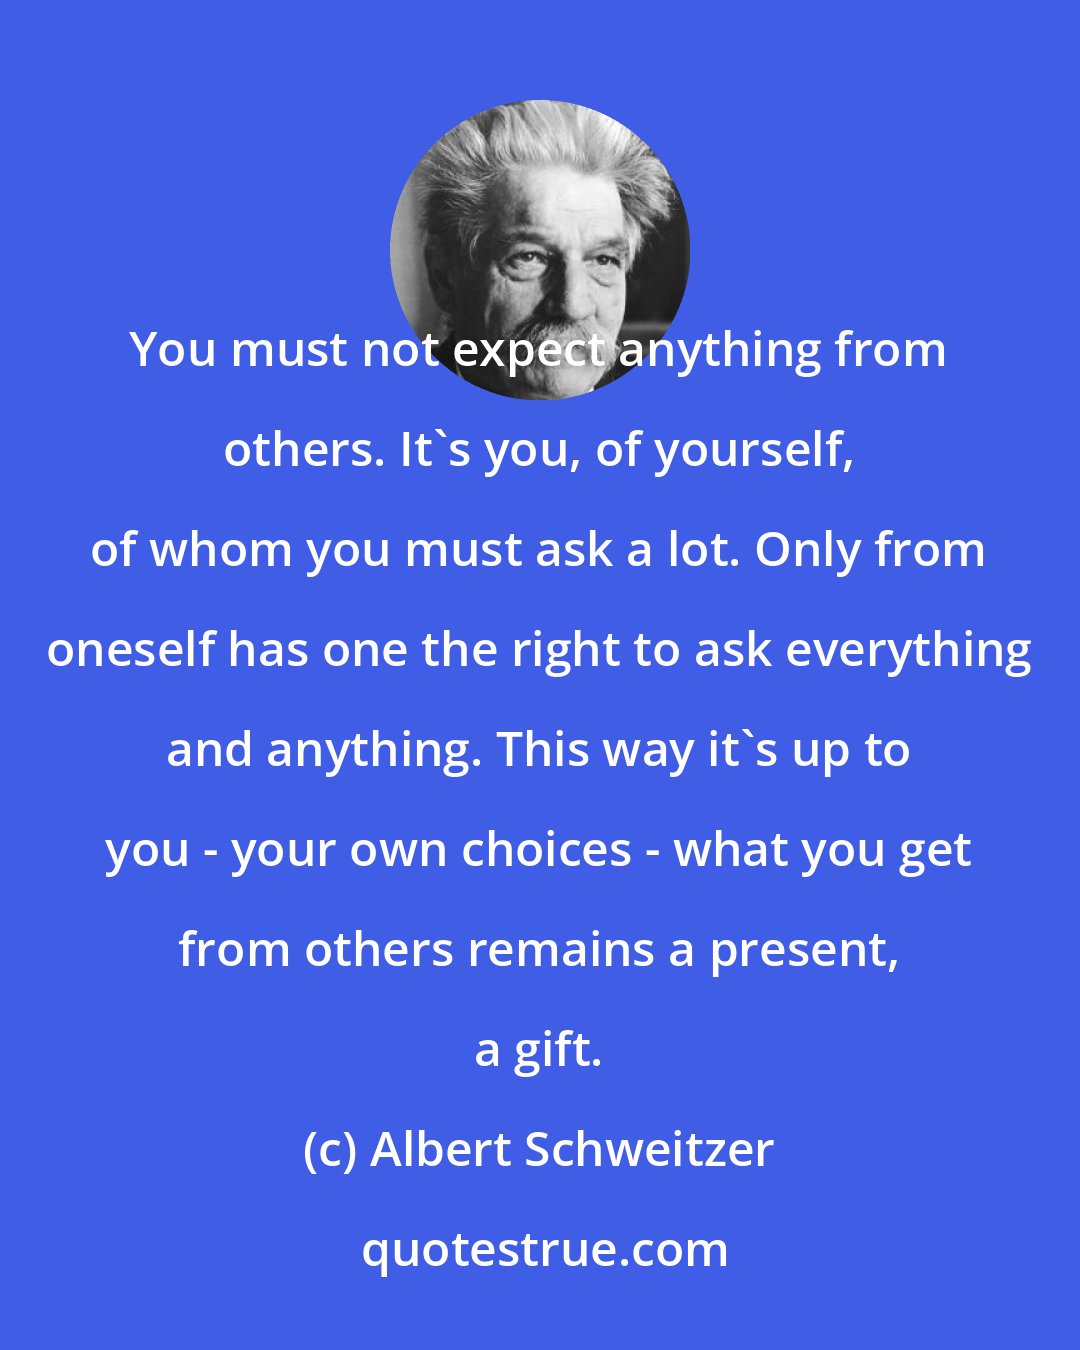 Albert Schweitzer: You must not expect anything from others. It's you, of yourself, of whom you must ask a lot. Only from oneself has one the right to ask everything and anything. This way it's up to you - your own choices - what you get from others remains a present, a gift.